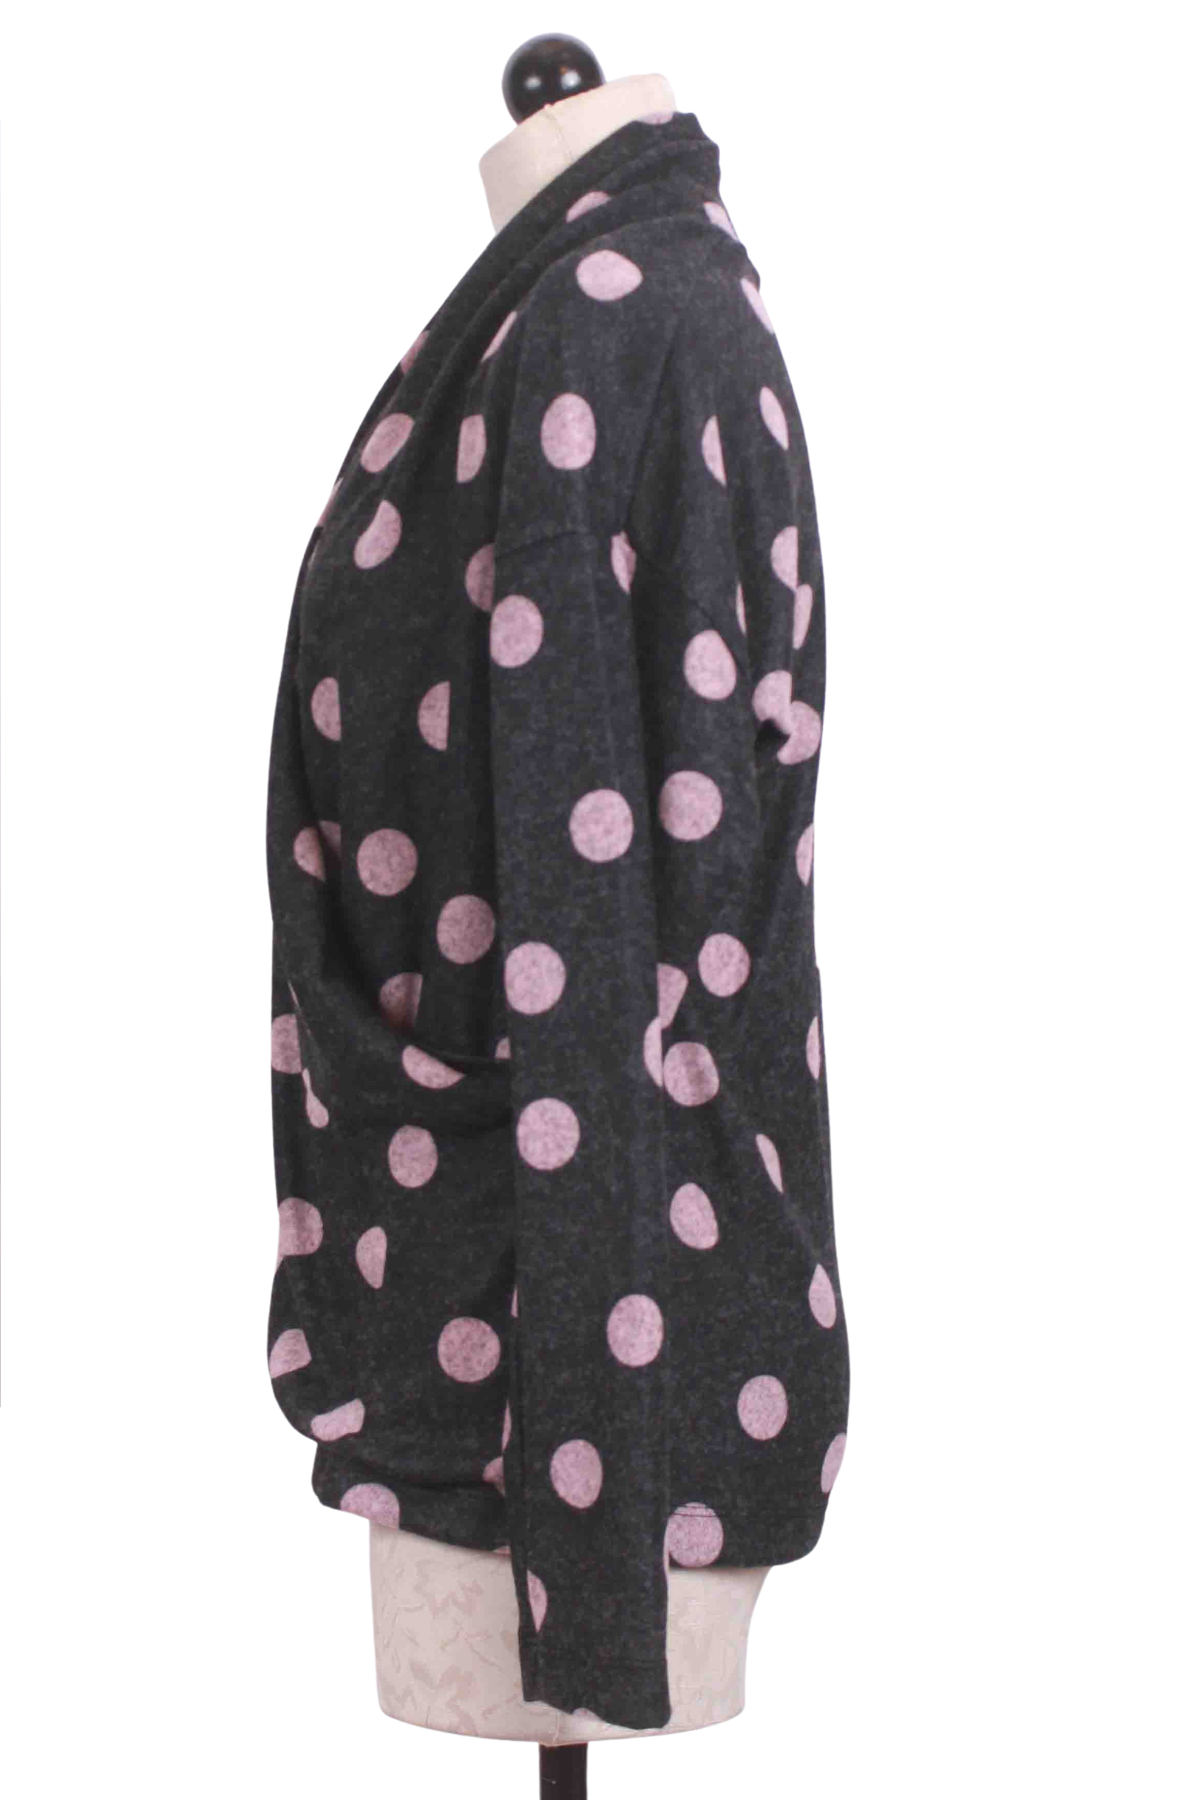 side view of Rose Blossom Polka Dot Front Overlay Top by Nally and Millie